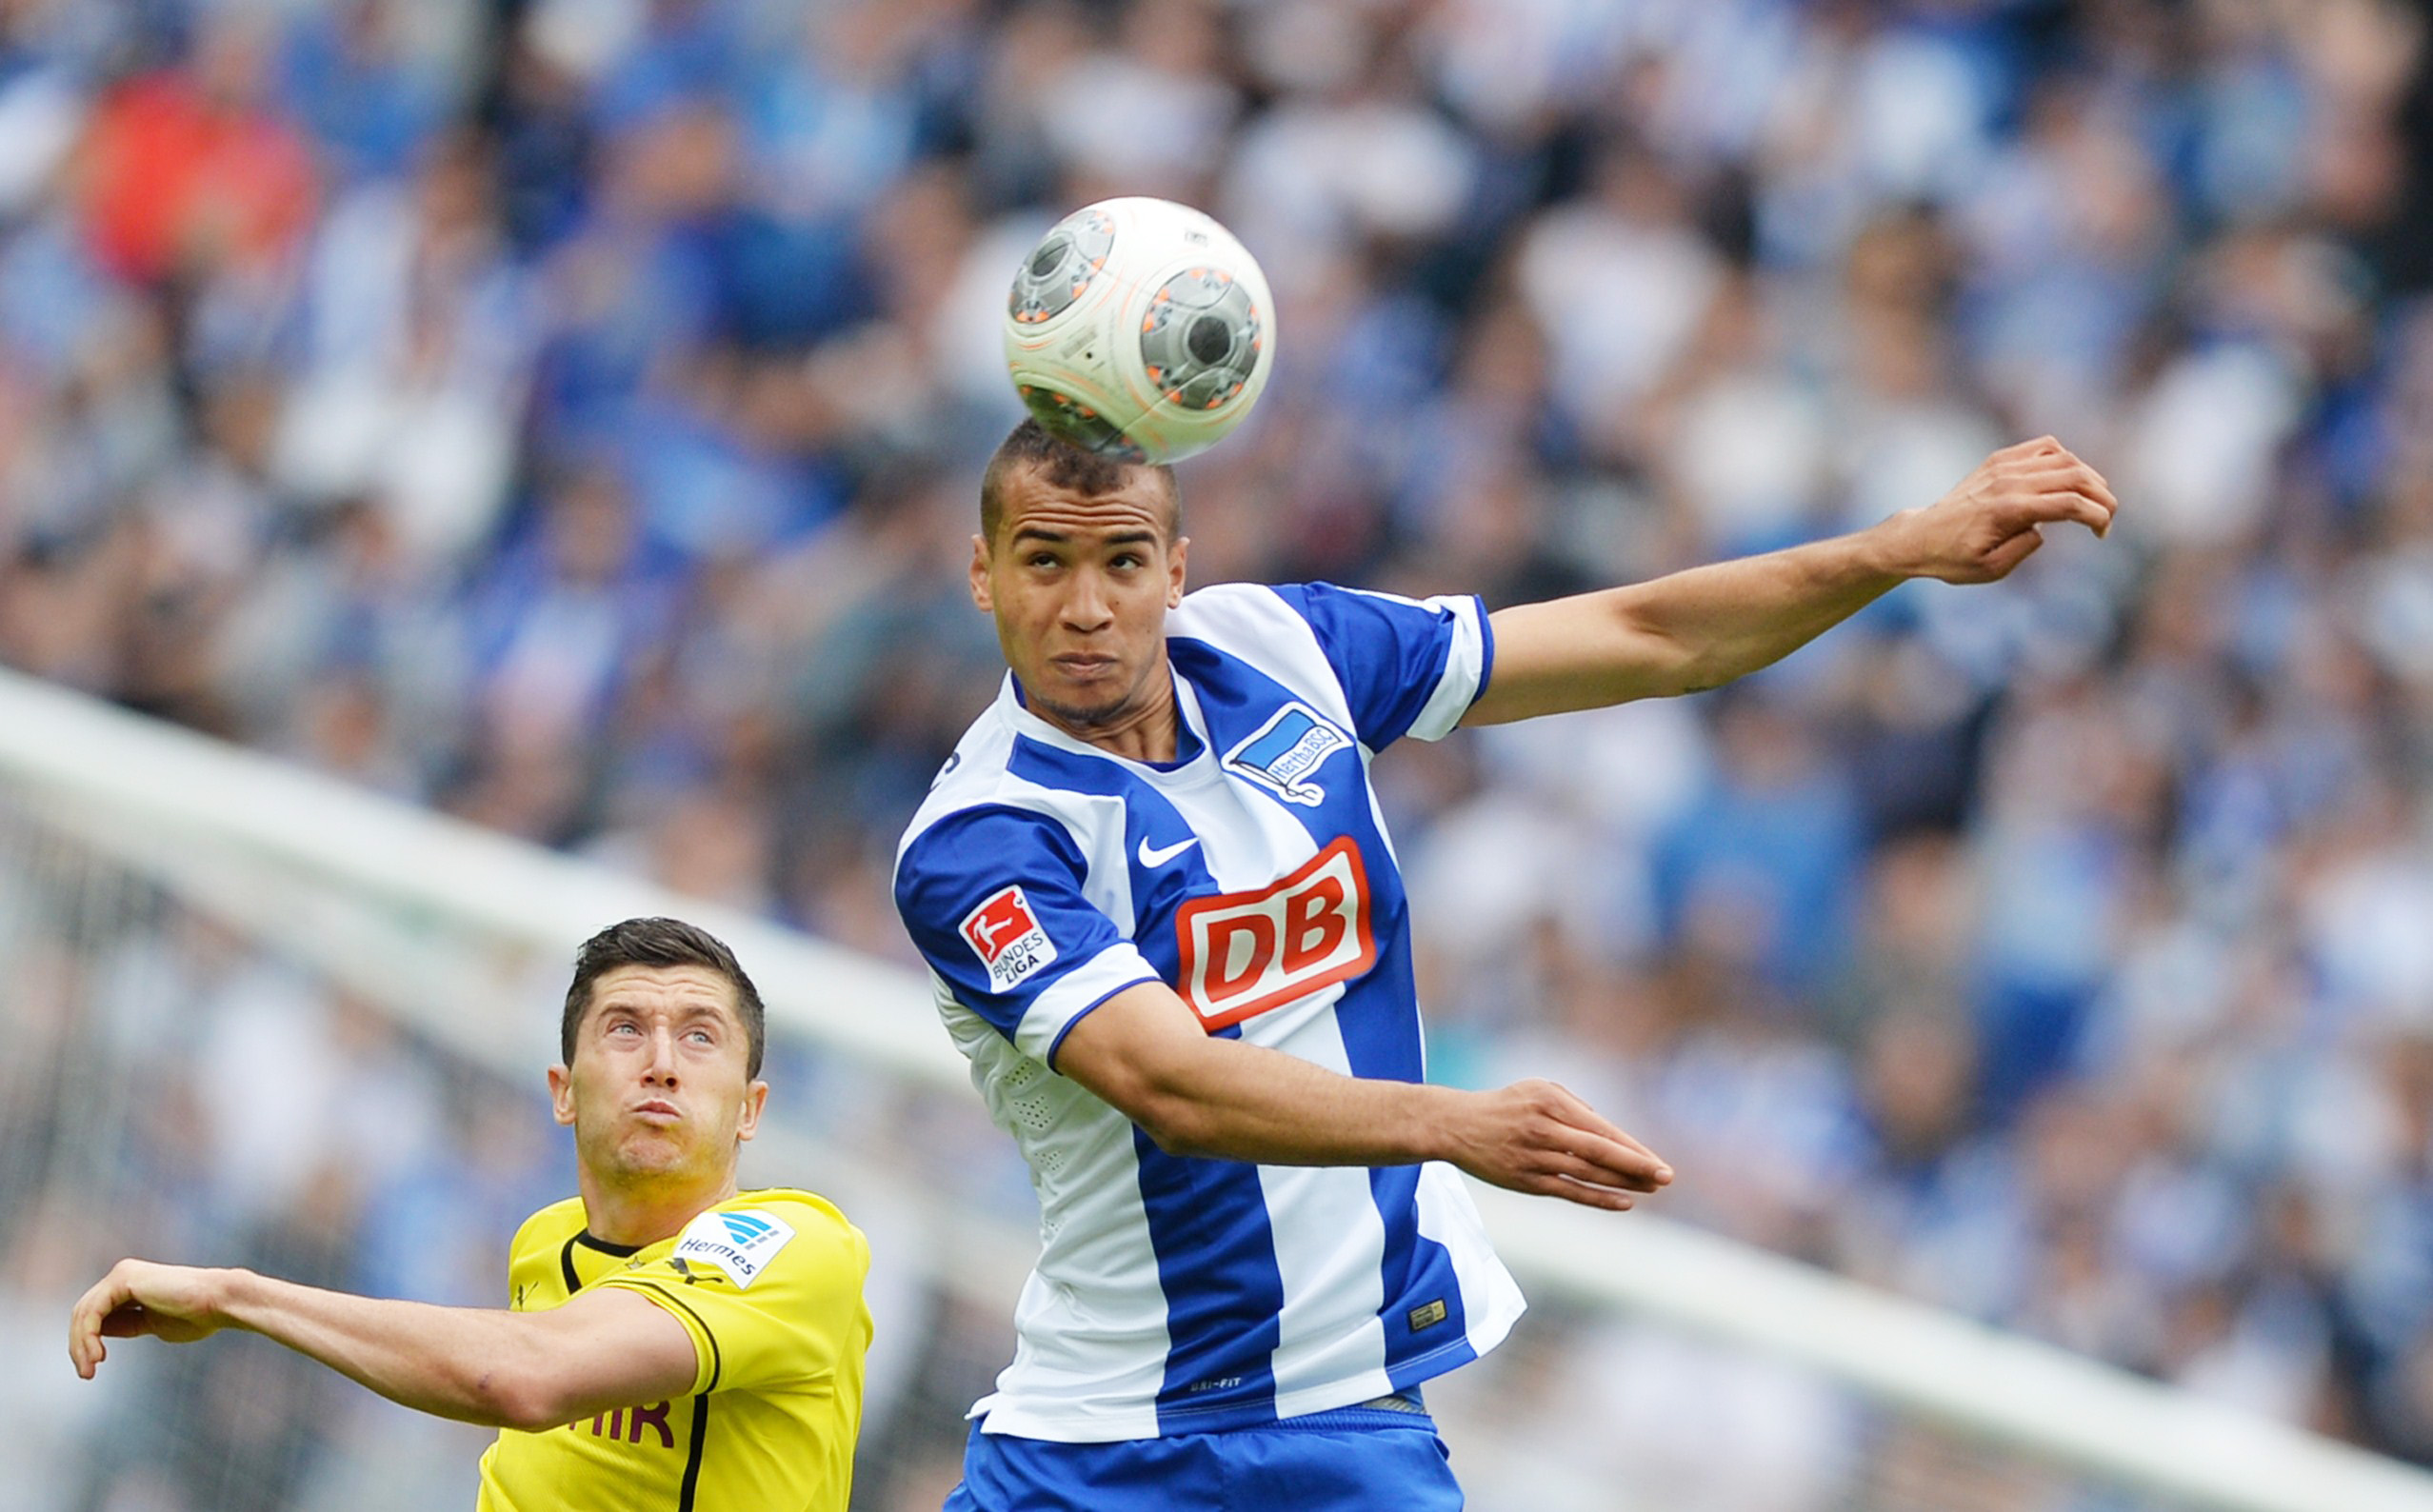 PHOTO: German-American player John Anthony Brooks fights for control of the ball for Hertha BSC during German league play in Berlin on May 10, 2014.